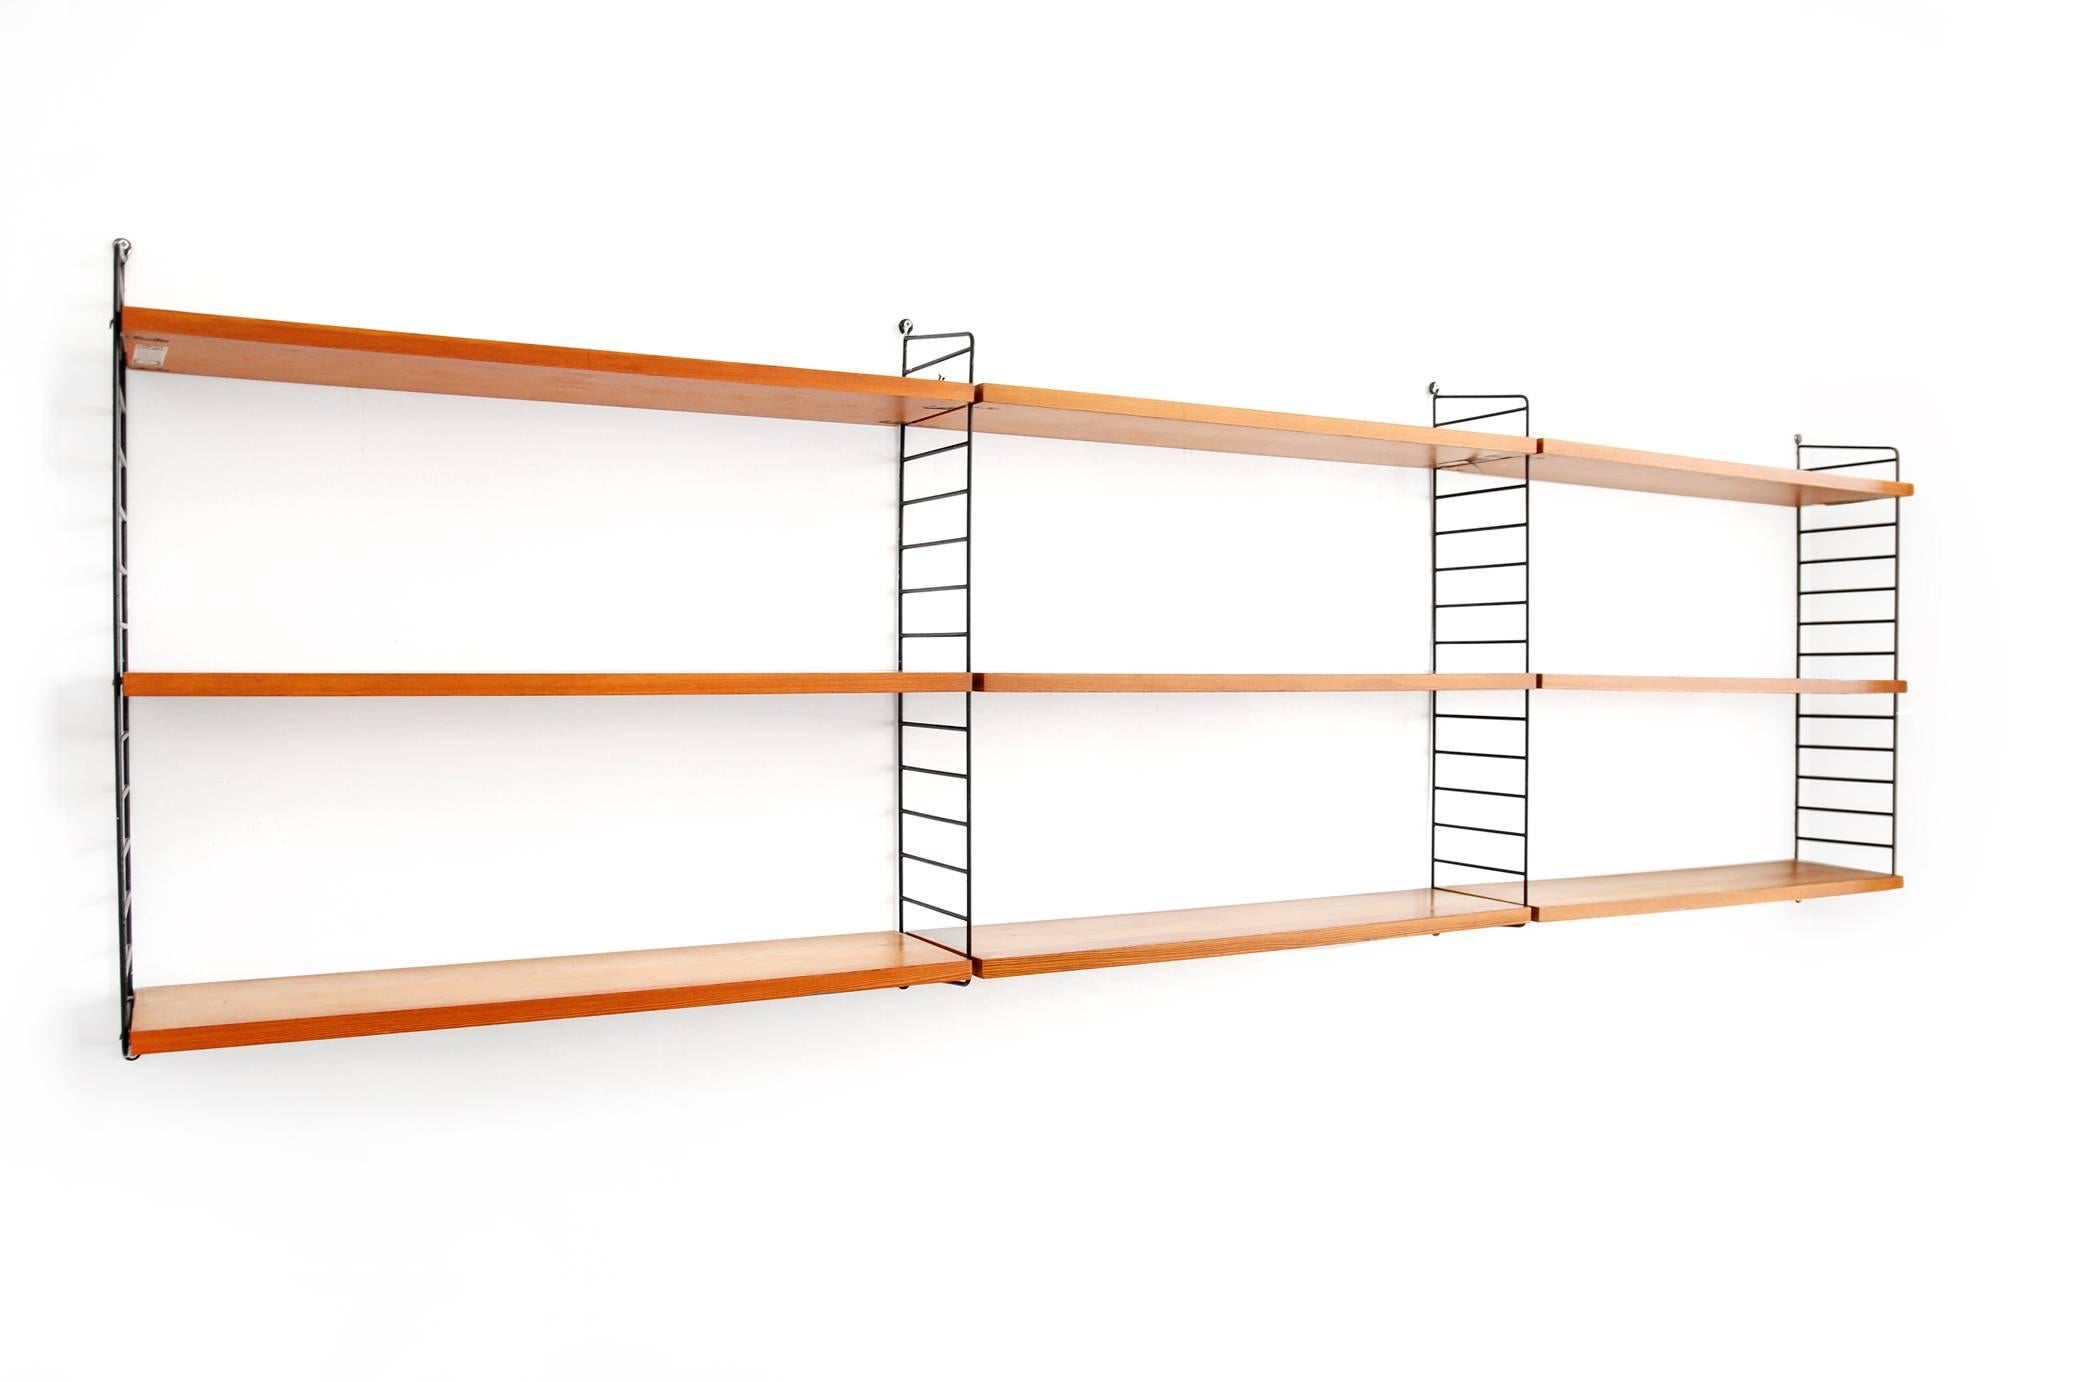 Beautiful original and early modulair String shelving system designed by: Nils Nisse Strinning and produced by String Design AB Sweden, October 1958.
What once was his graduation project, is now a populair item in a modern interior.
The shelfs are